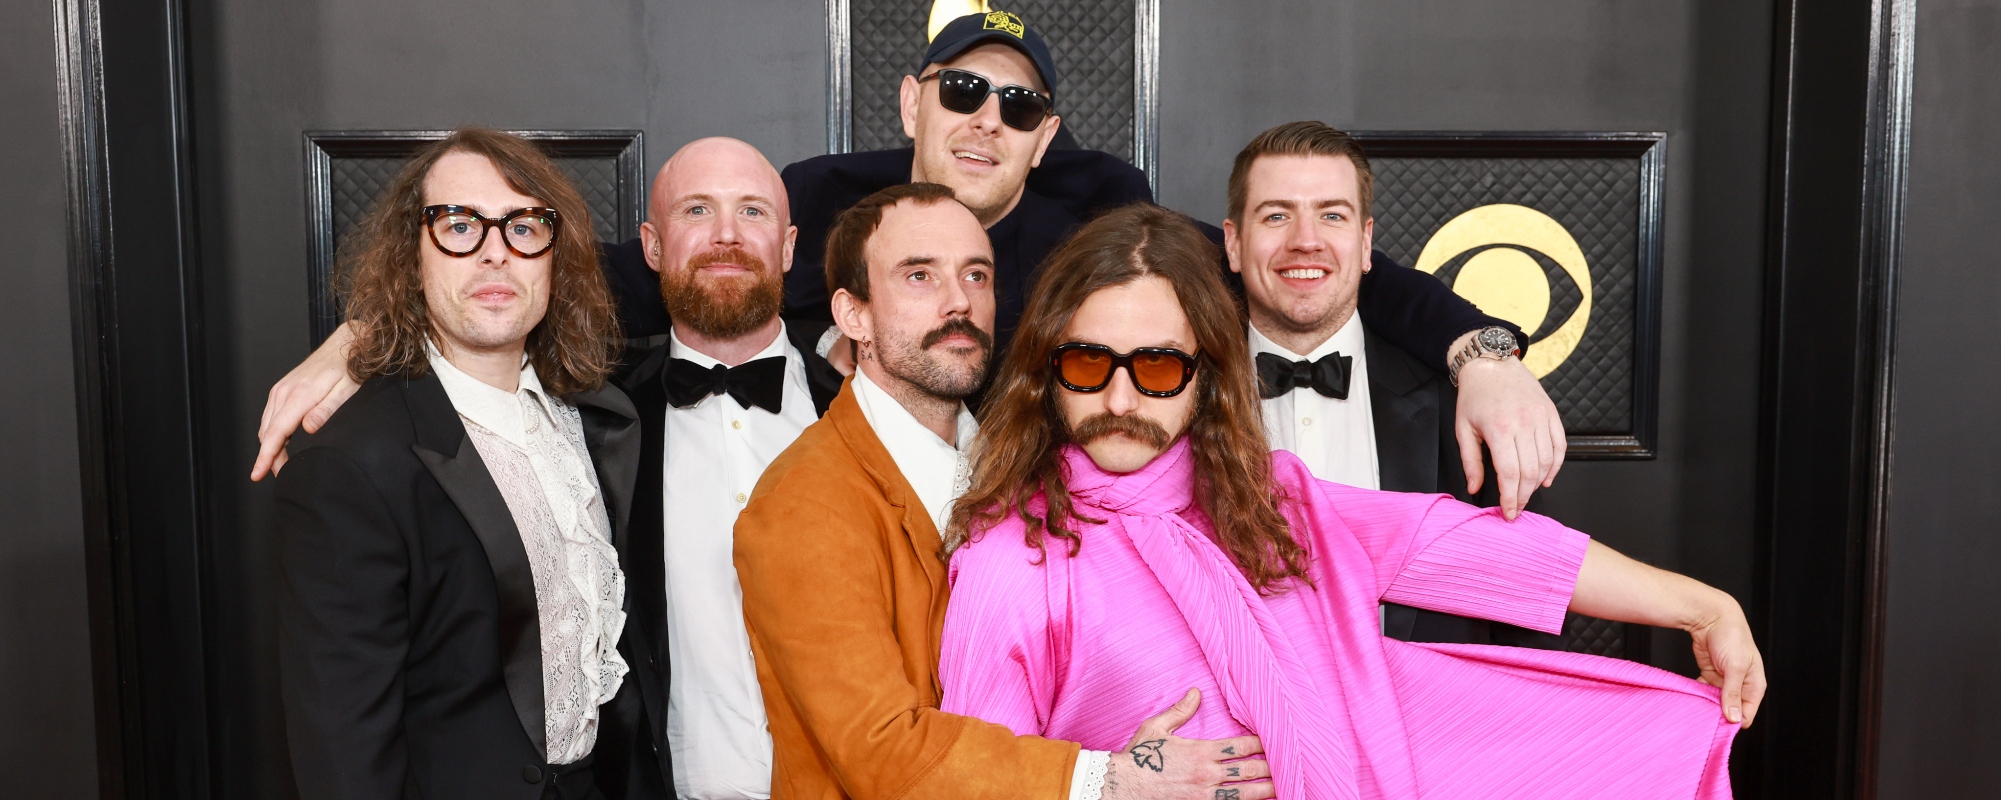 Listen: IDLES Release Newest Single “Gift Horse” with Increasingly Bizarre Music Video